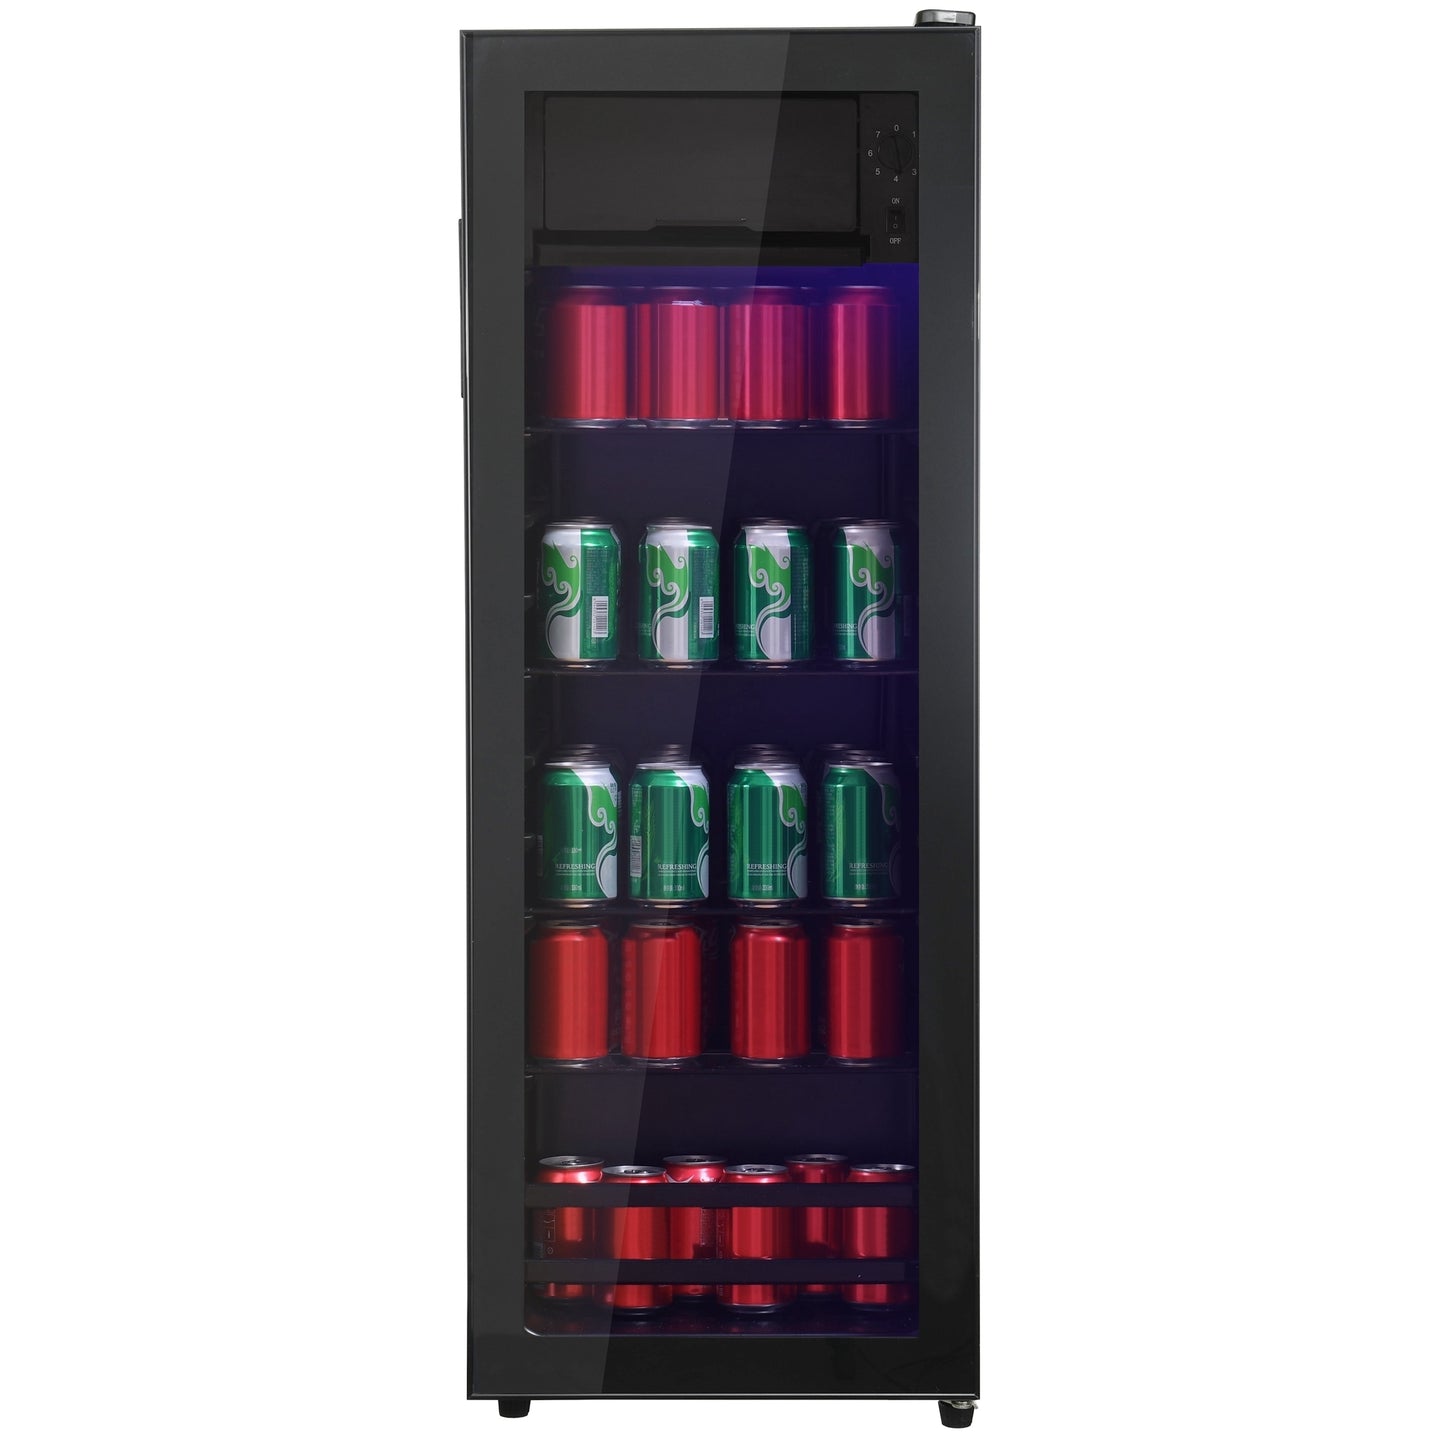 4.5Cu.ft mini fridge, 0.3Cu.ft freezer, up to 94 cans of soda, beer or wine. Silent, high-efficiency and energy-saving compressor, LED lighting, 16.10"×15.70"×43.10", home, RV, apartment, office, etc.